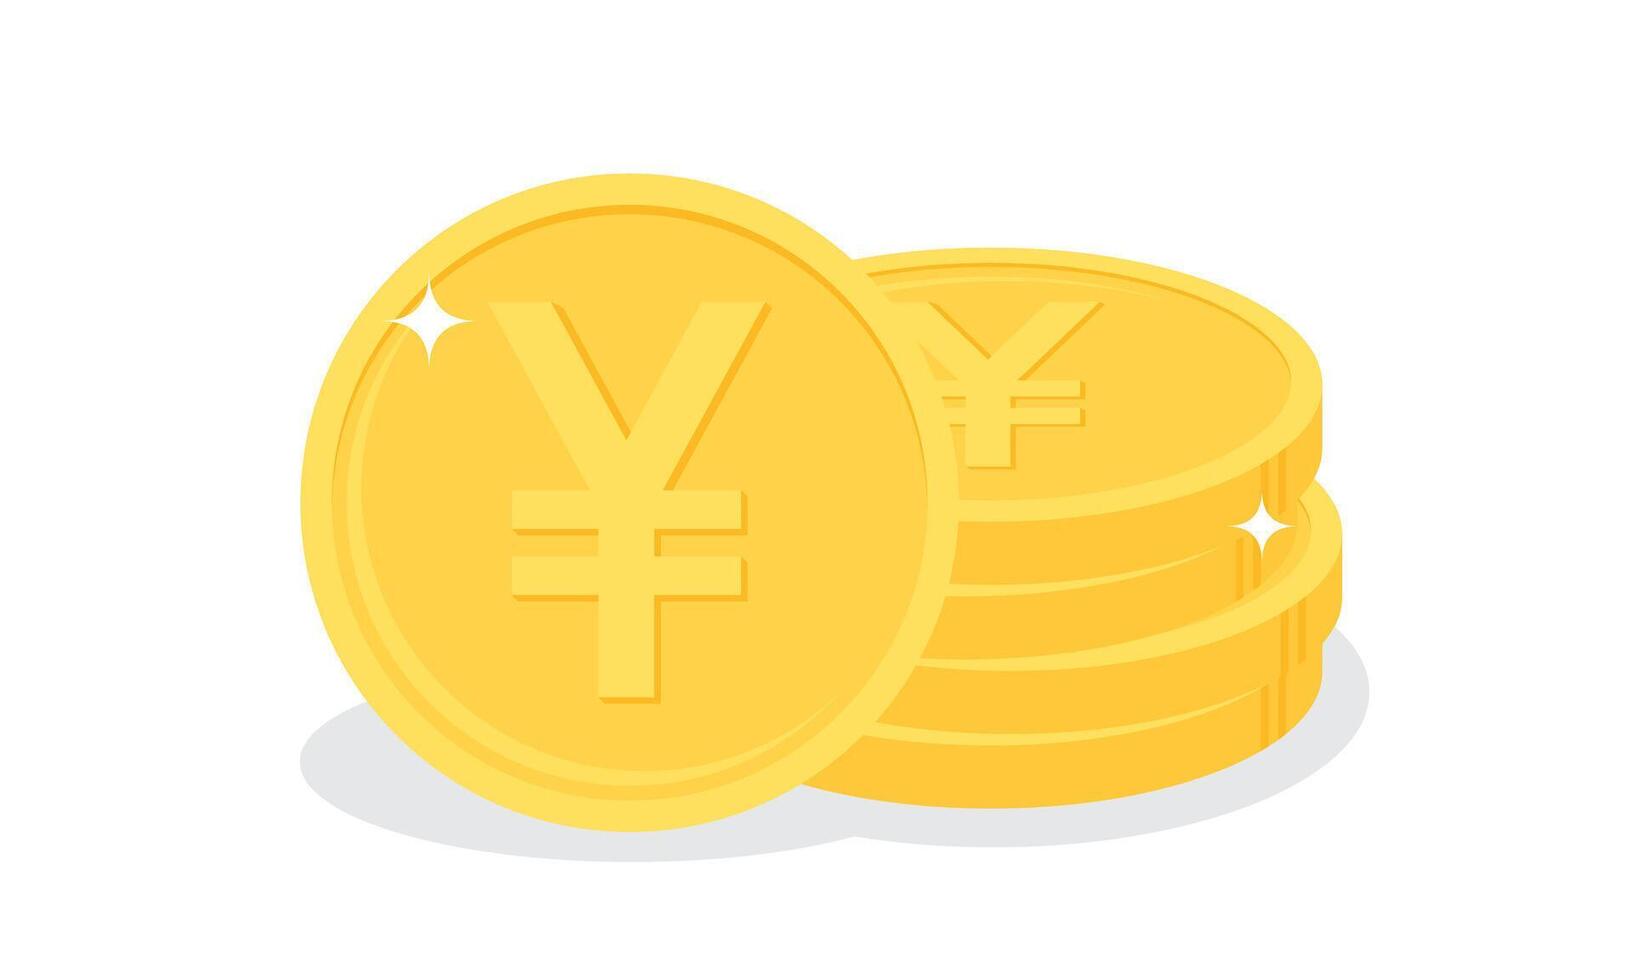 Stack of gold Japanese yen or Chinese yuan coins. Business and finance concept. Flat design vector illustration.